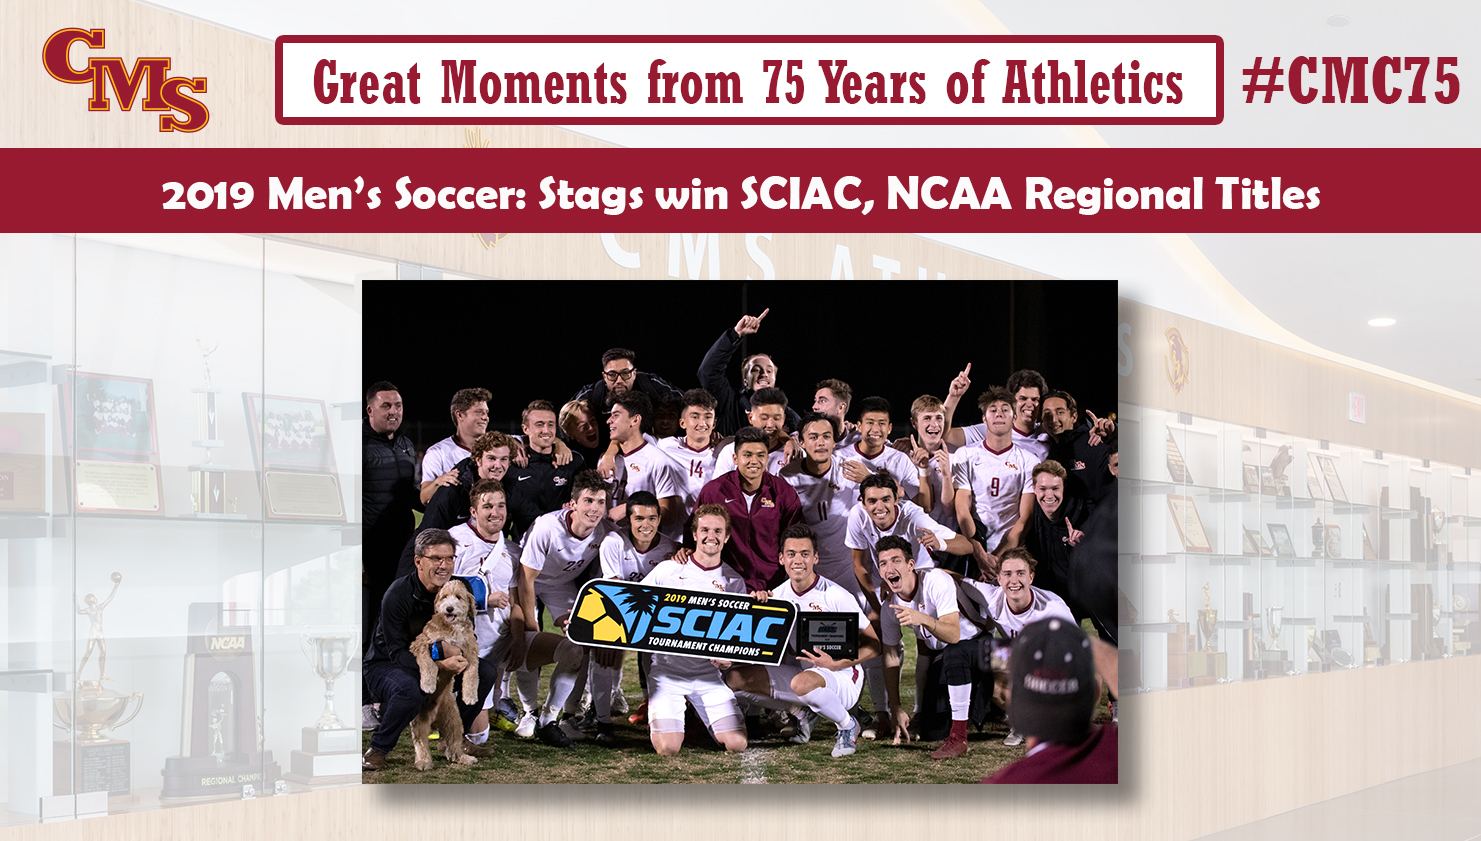 CMS celebrating its 2019 SCIAC title. Words over the photo read: Great Moments from 75 Years of Athletics. 2019 Men's Soccer: Stags win SCIAC, NCAA Regional Titles